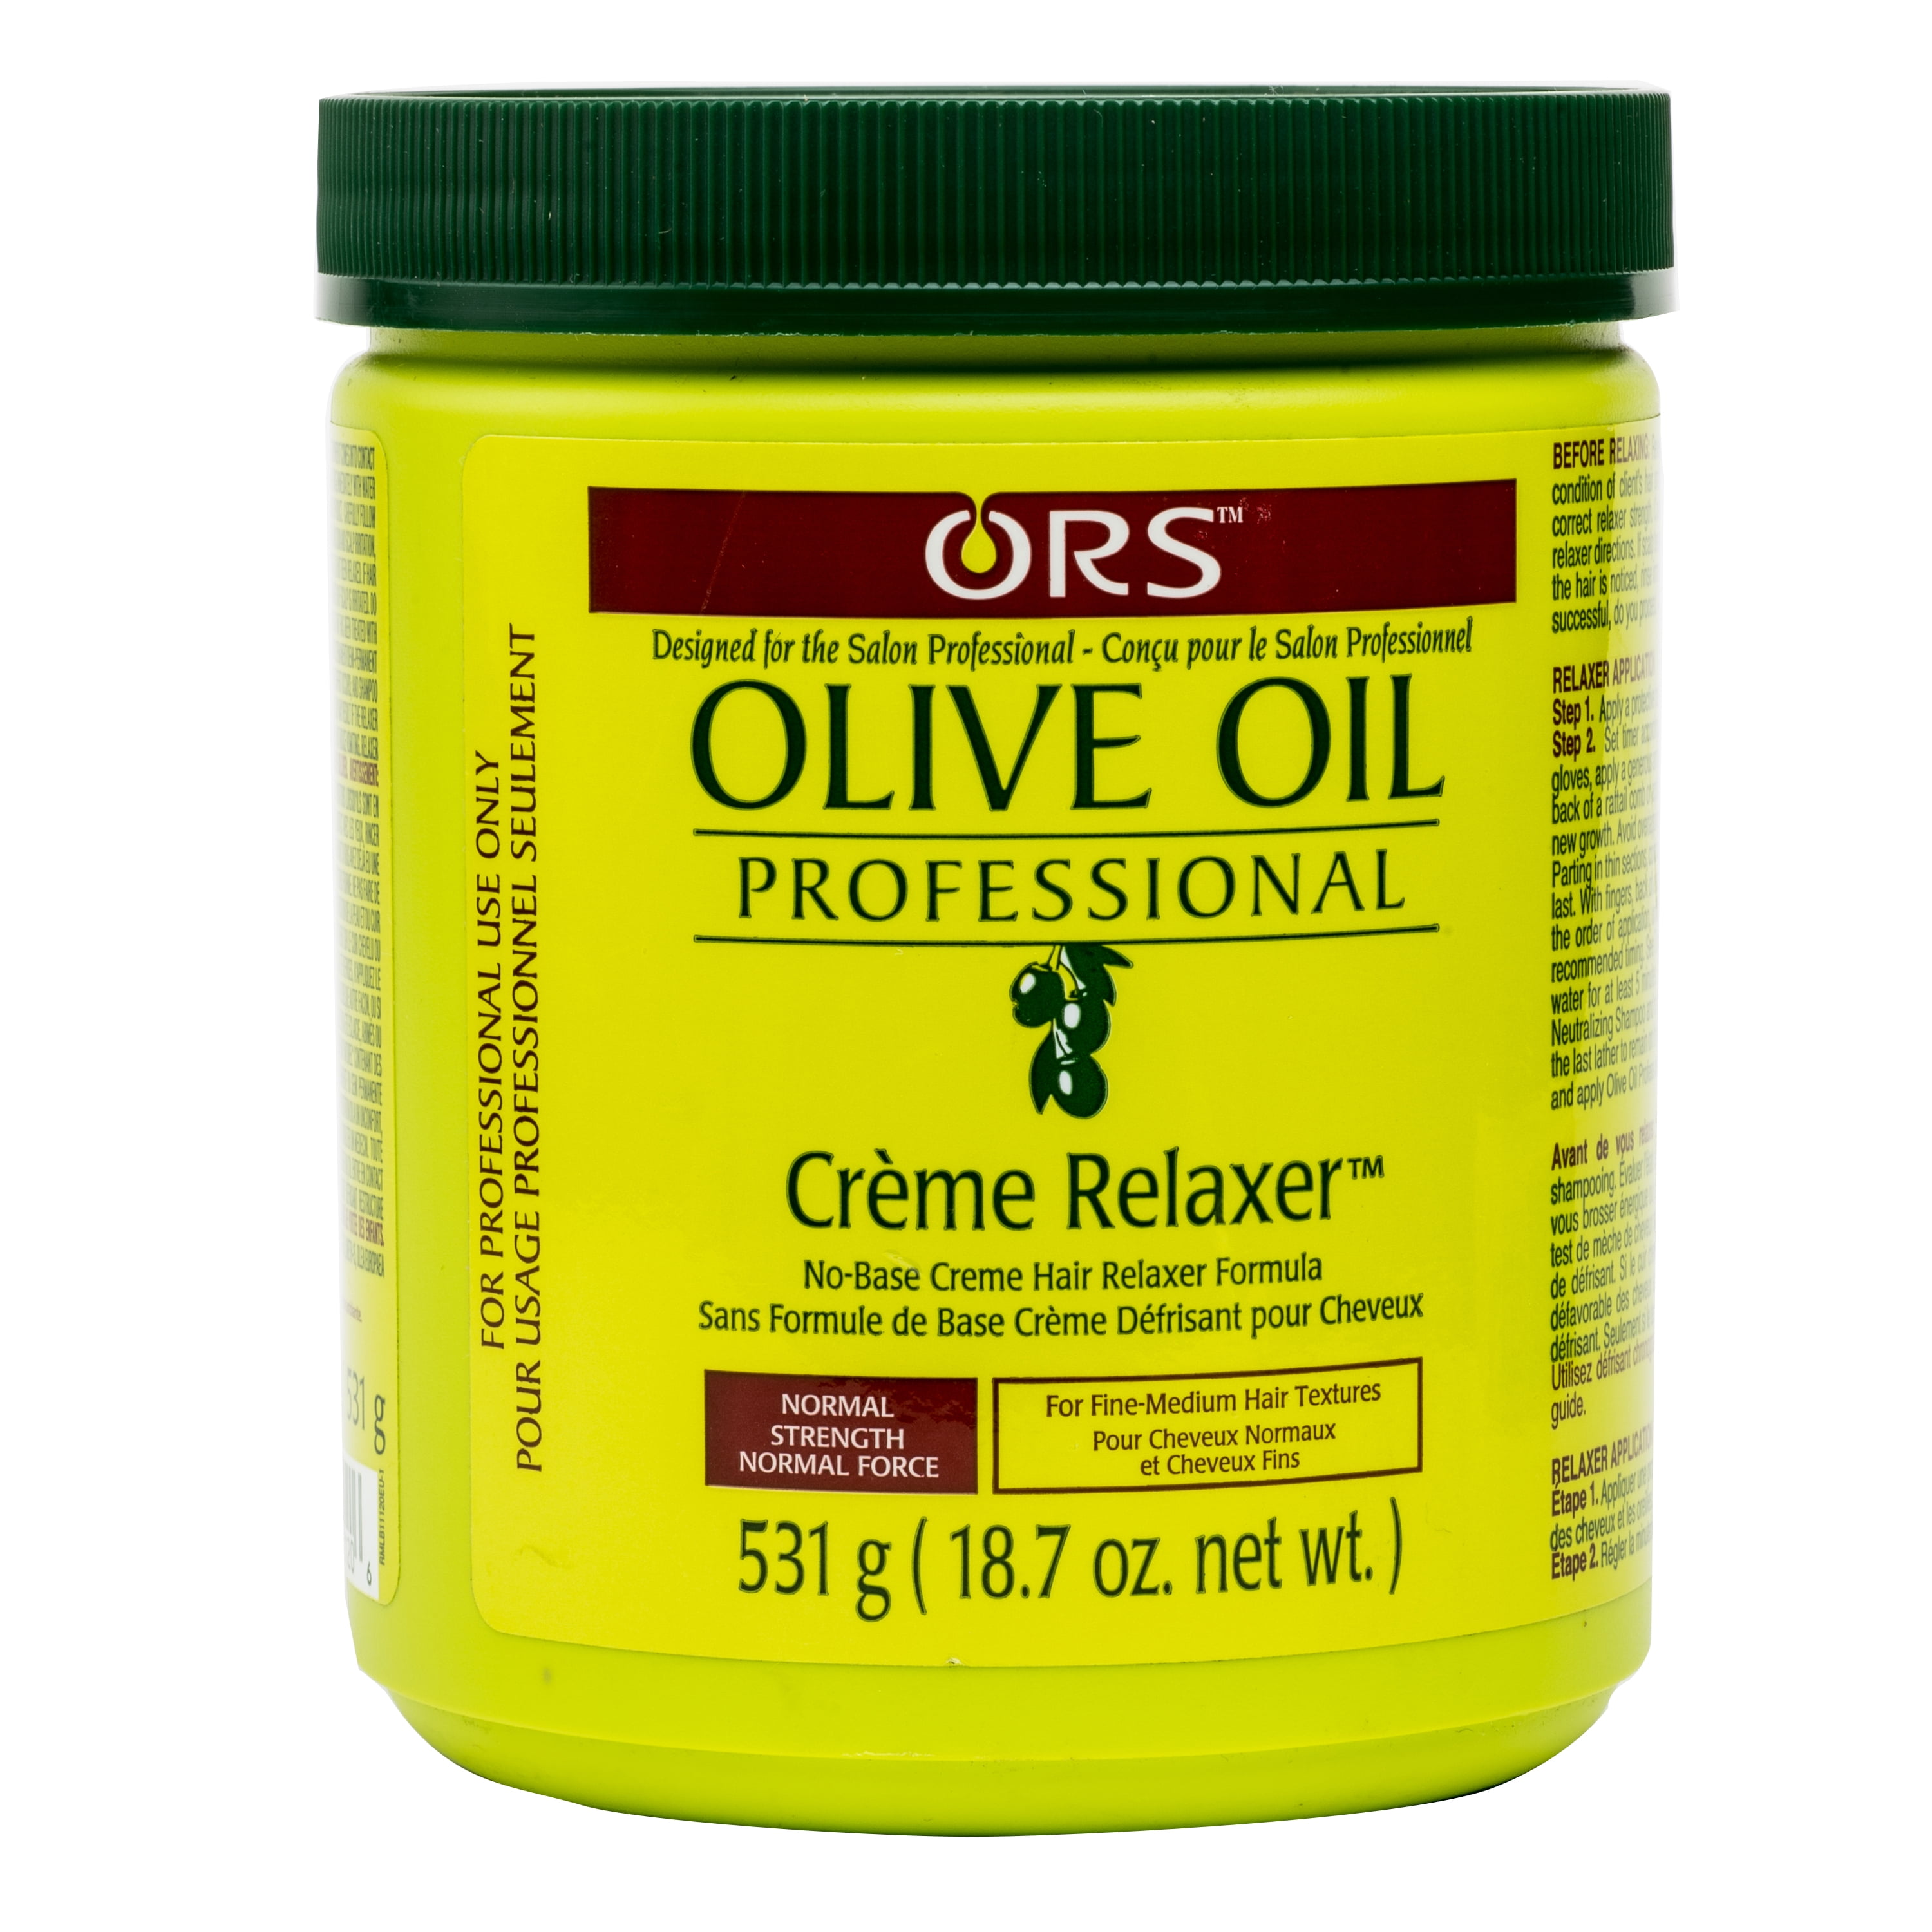 Sale > ors blow out relaxer > in stock”></p><div class='code-block code-block-2' style='margin: 8px 0; clear: both;'>
x<center>
<script async src=